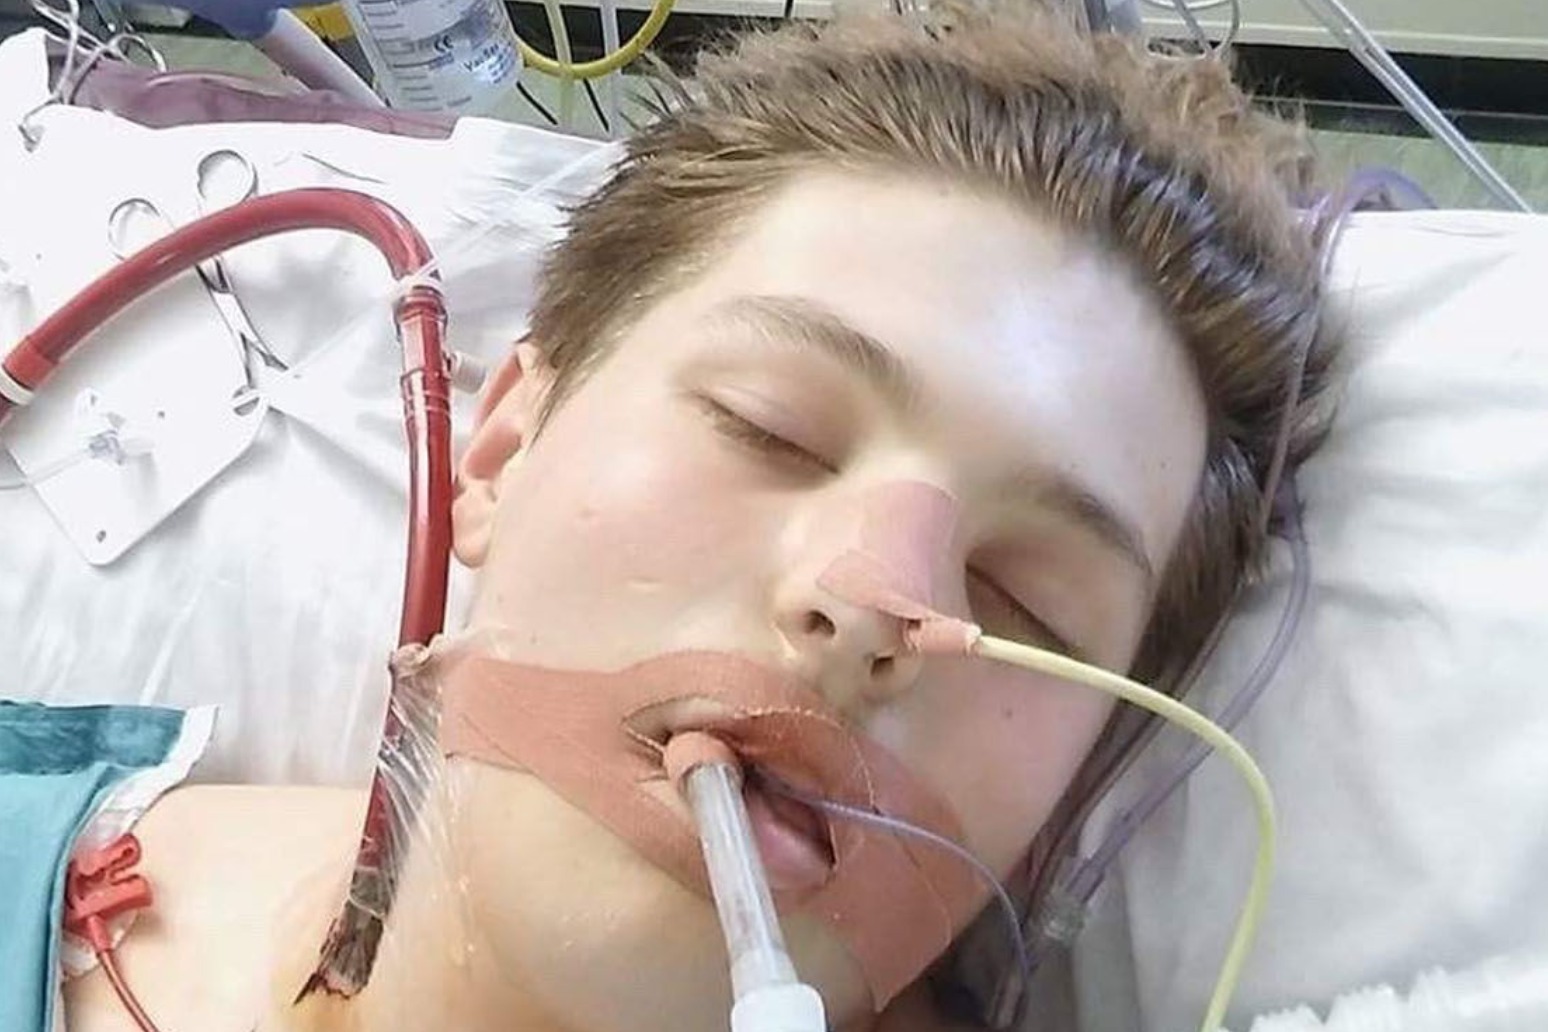 TEENAGER ALMOST DIED FROM LUNG FAILURE AFTER VAPING 